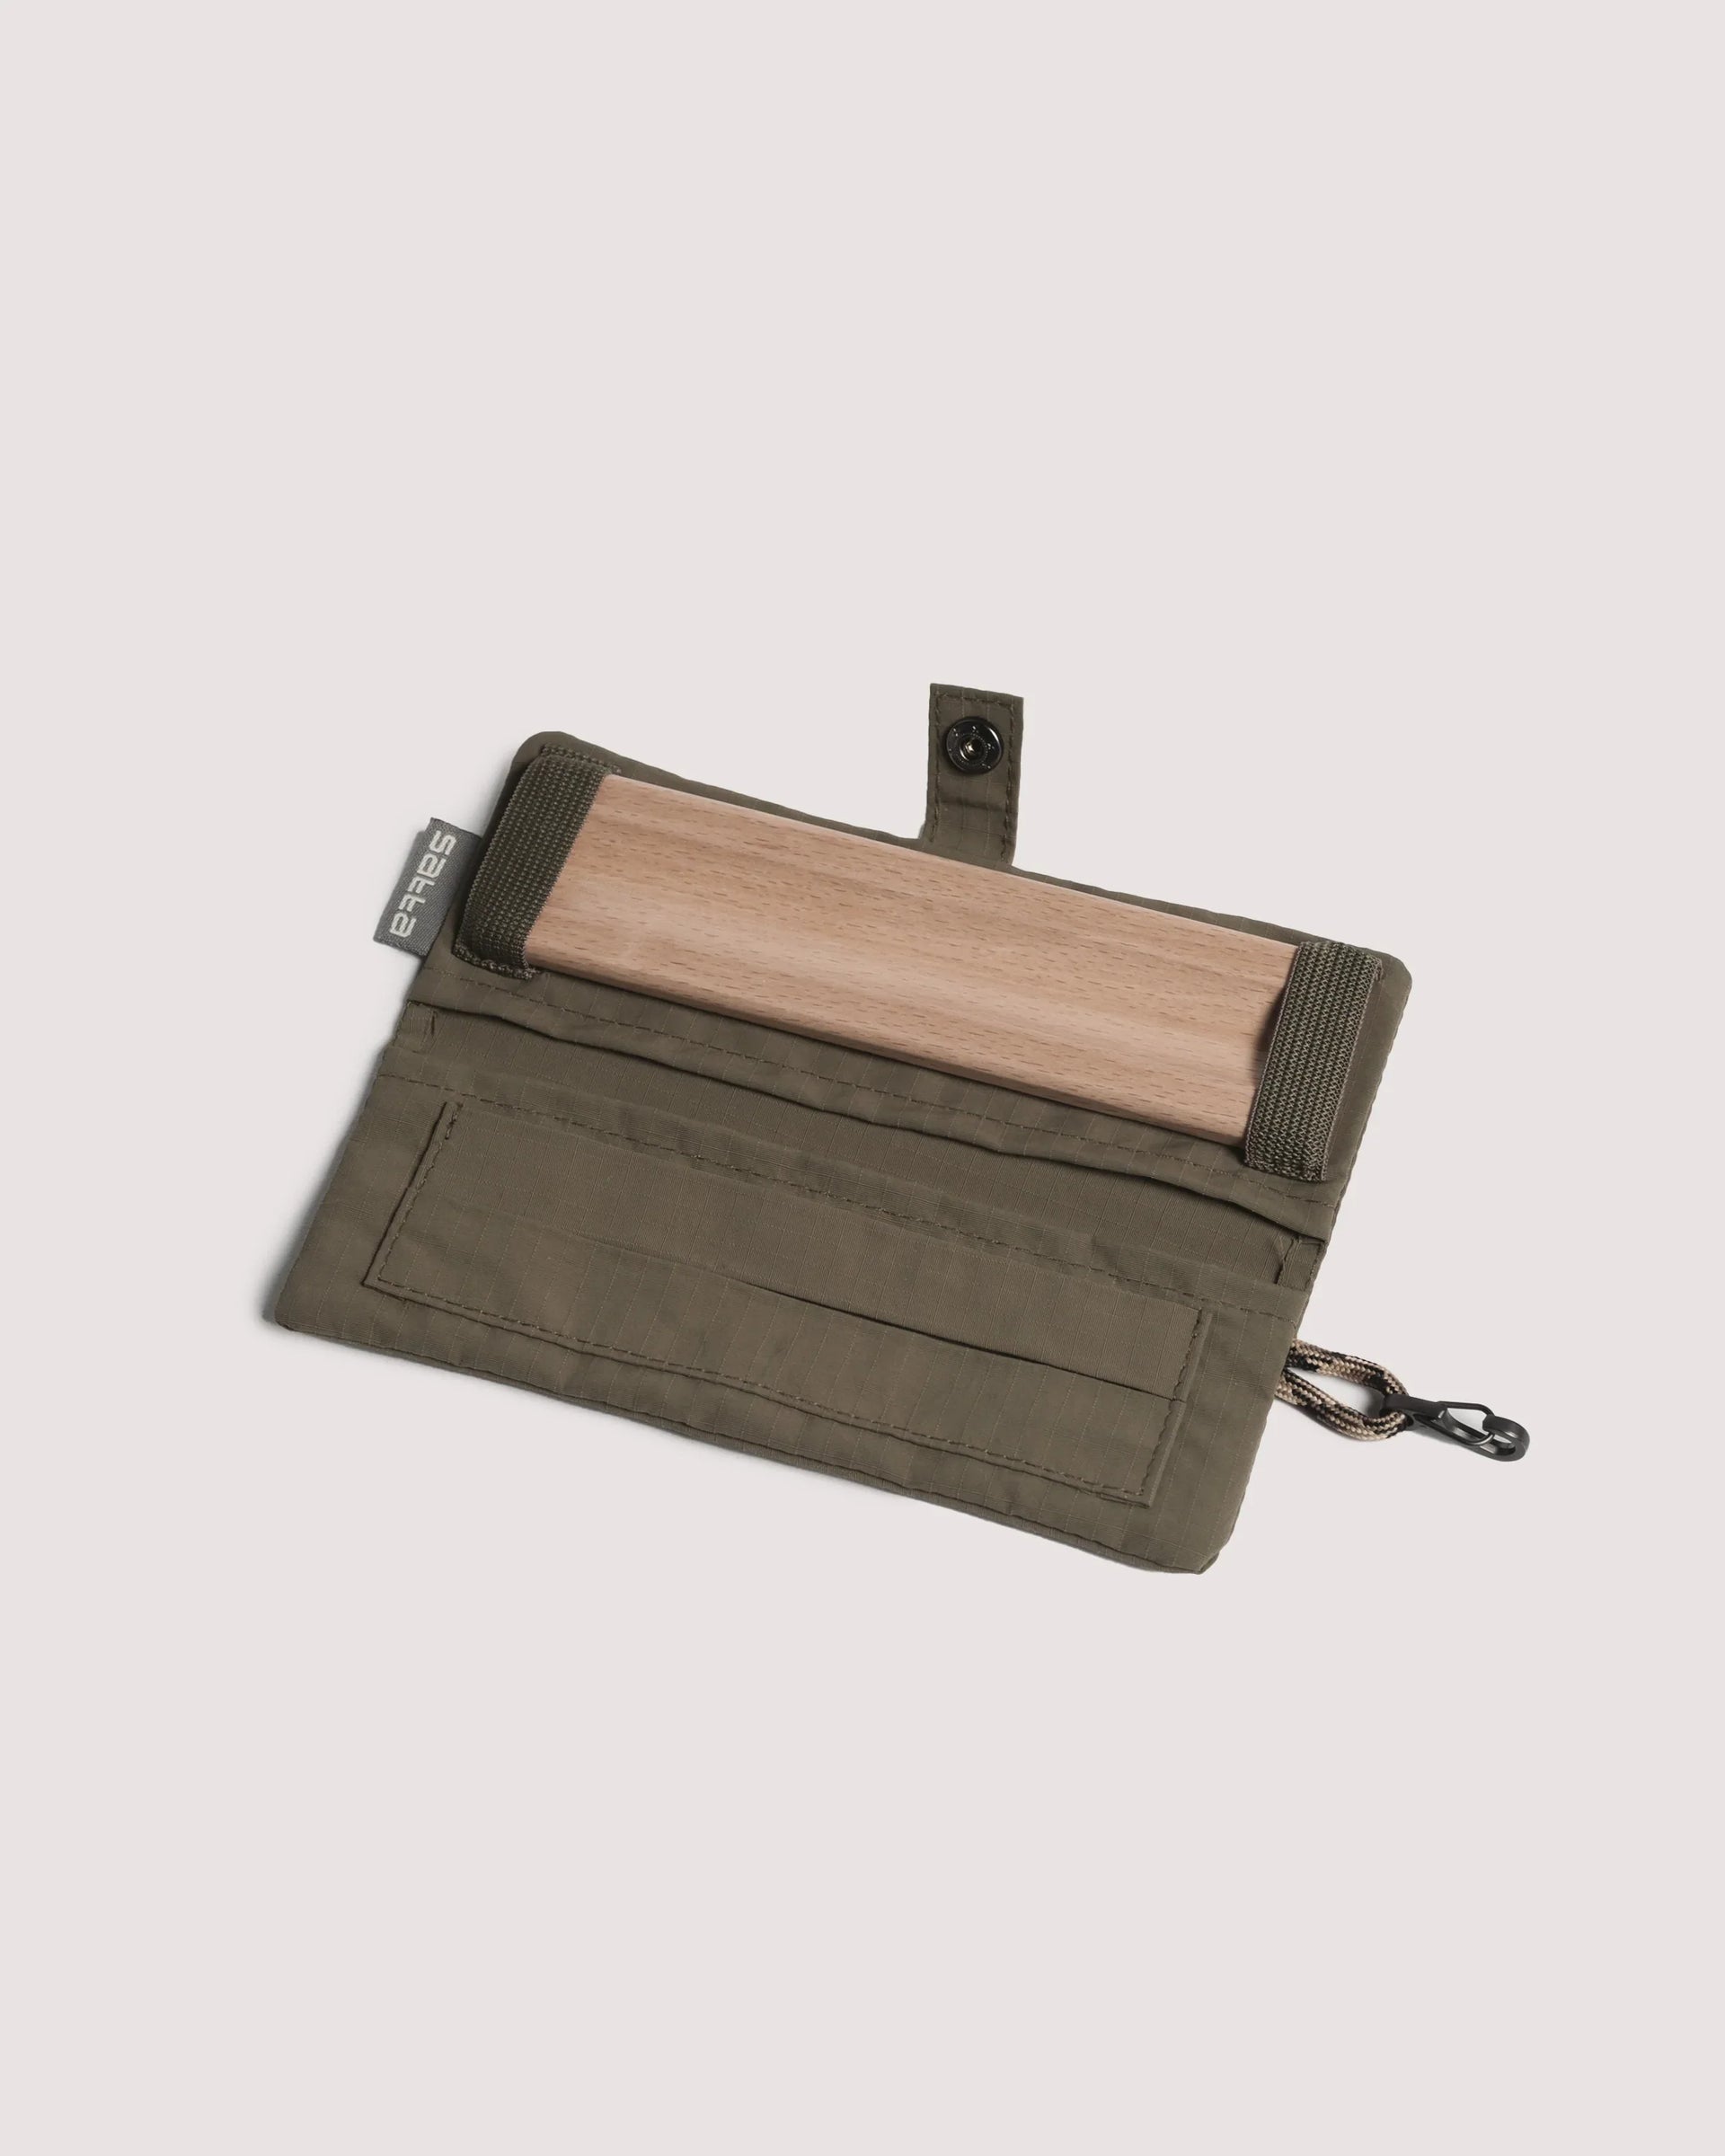 Rolling Pouch - Olive Drab